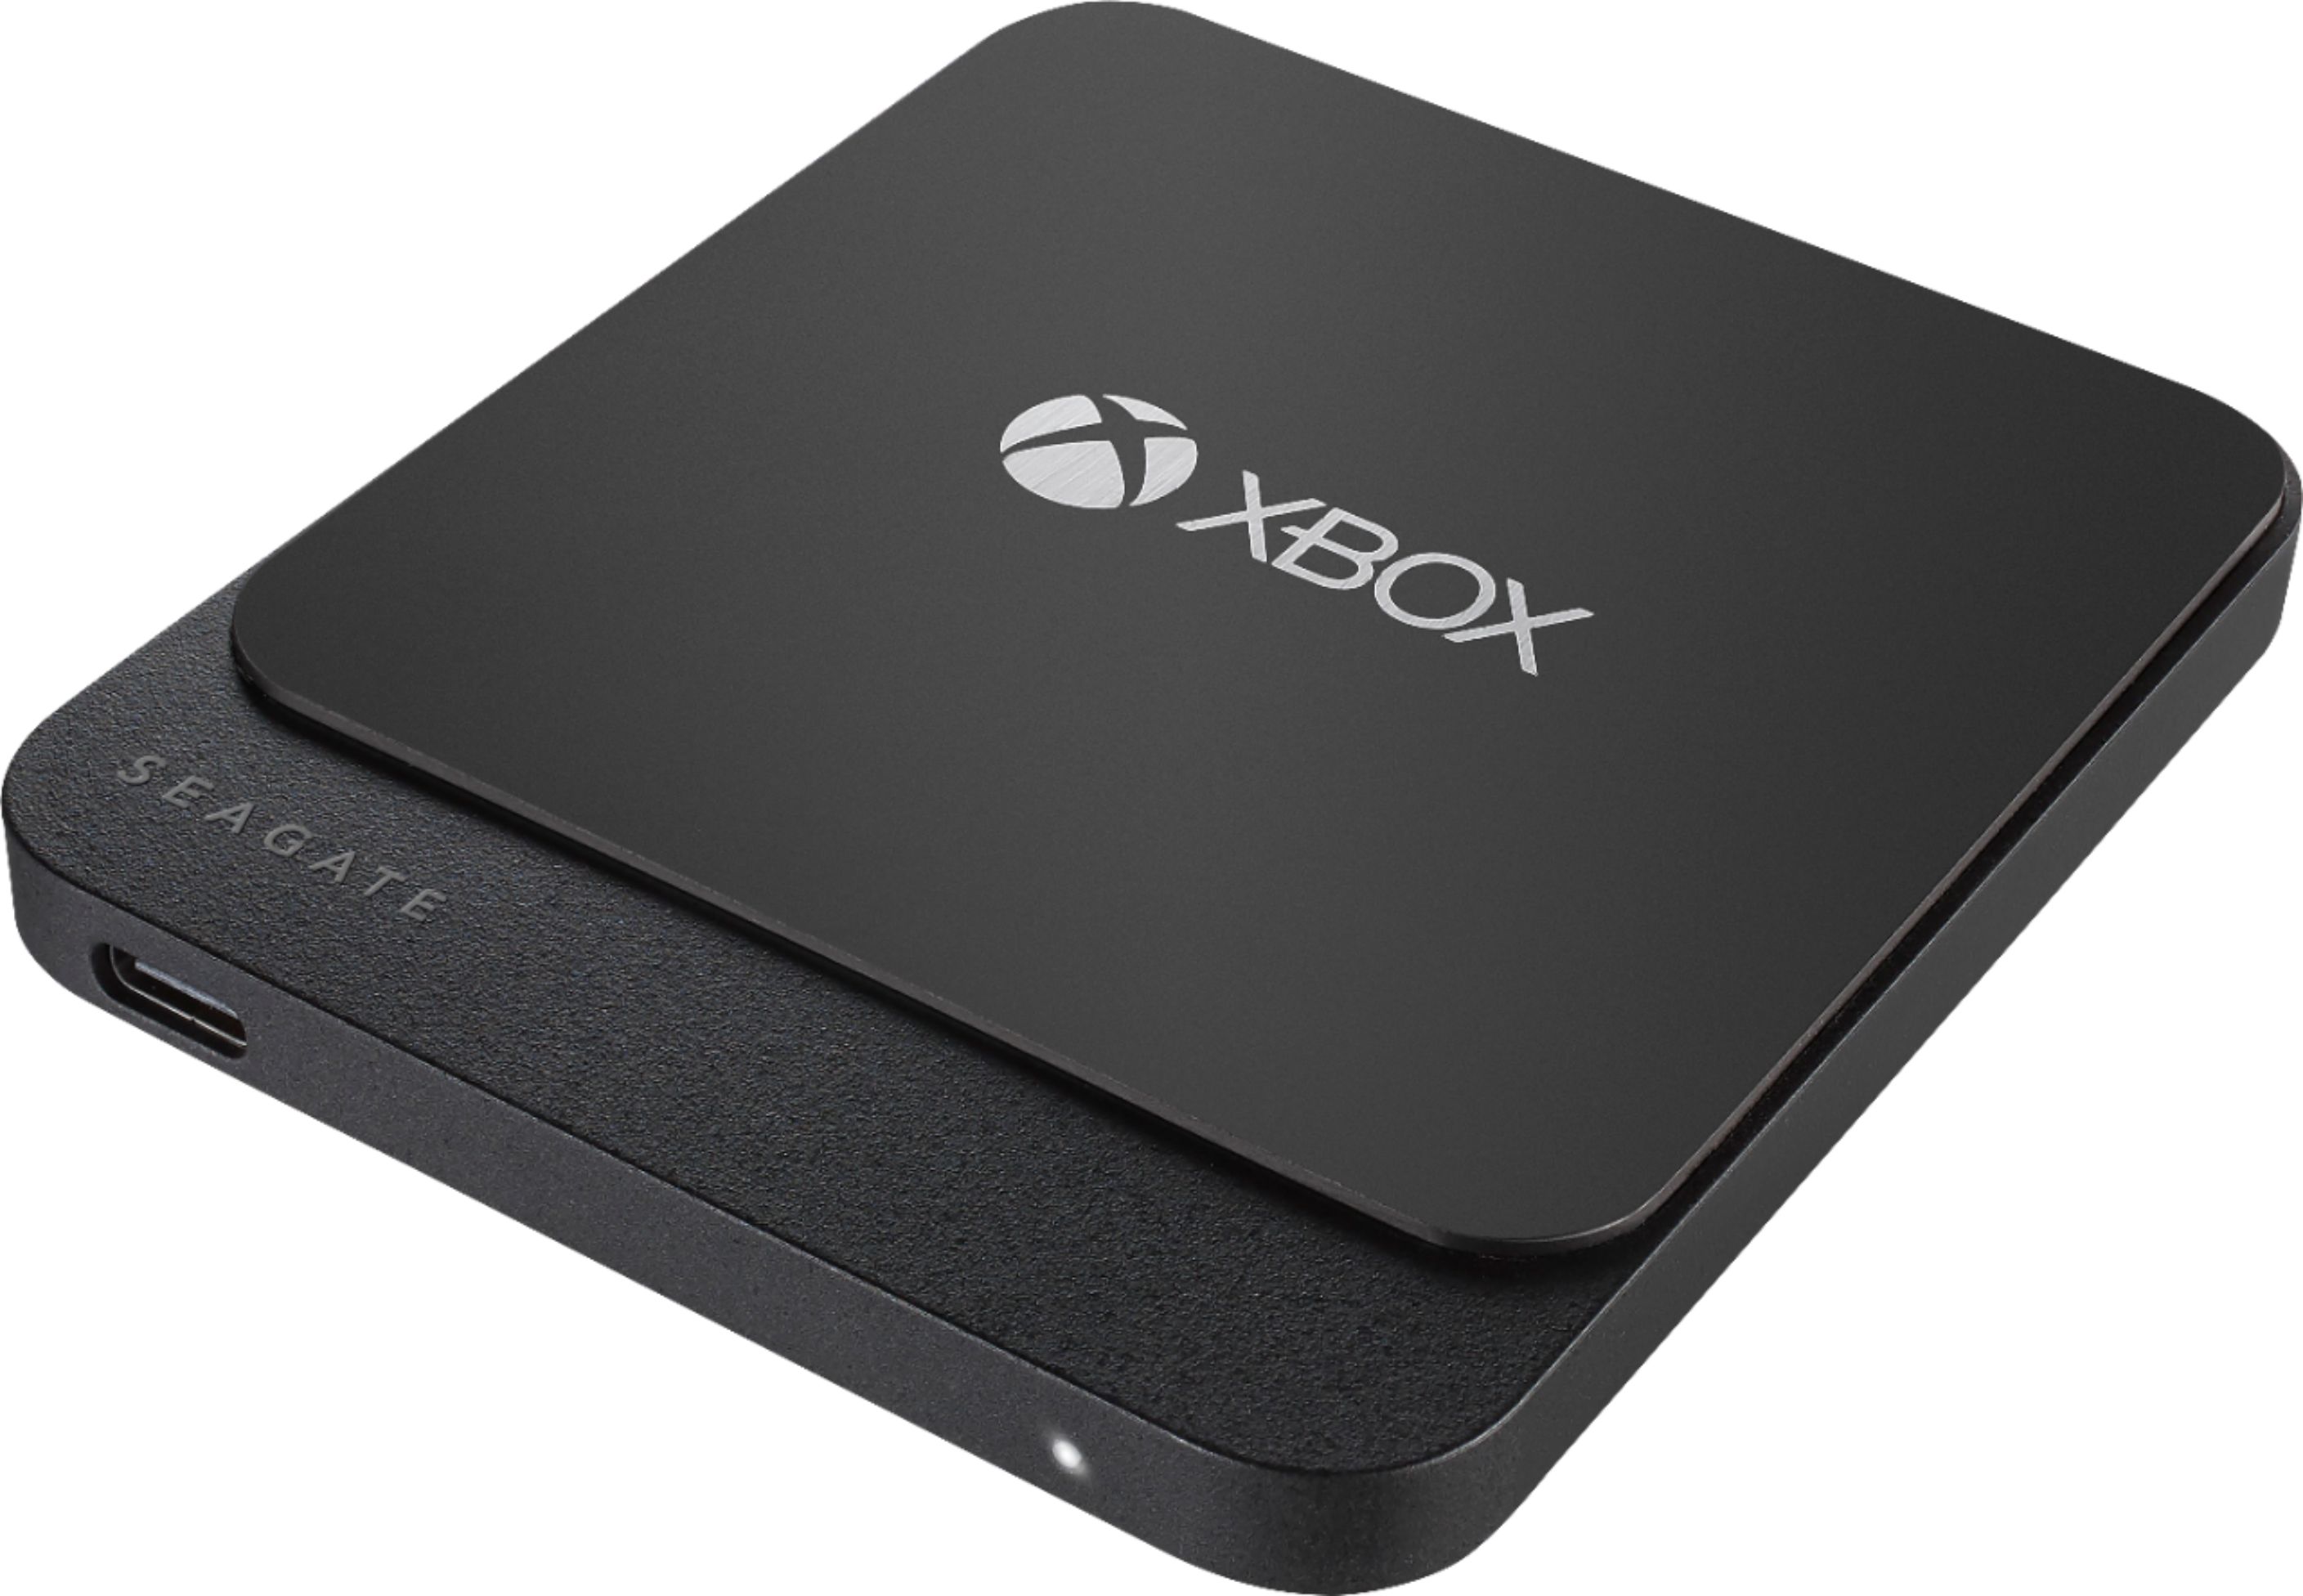 Angle View: Seagate Game Drive for Xbox 500GB External USB 3.0 Portable Solid State Drive - Black